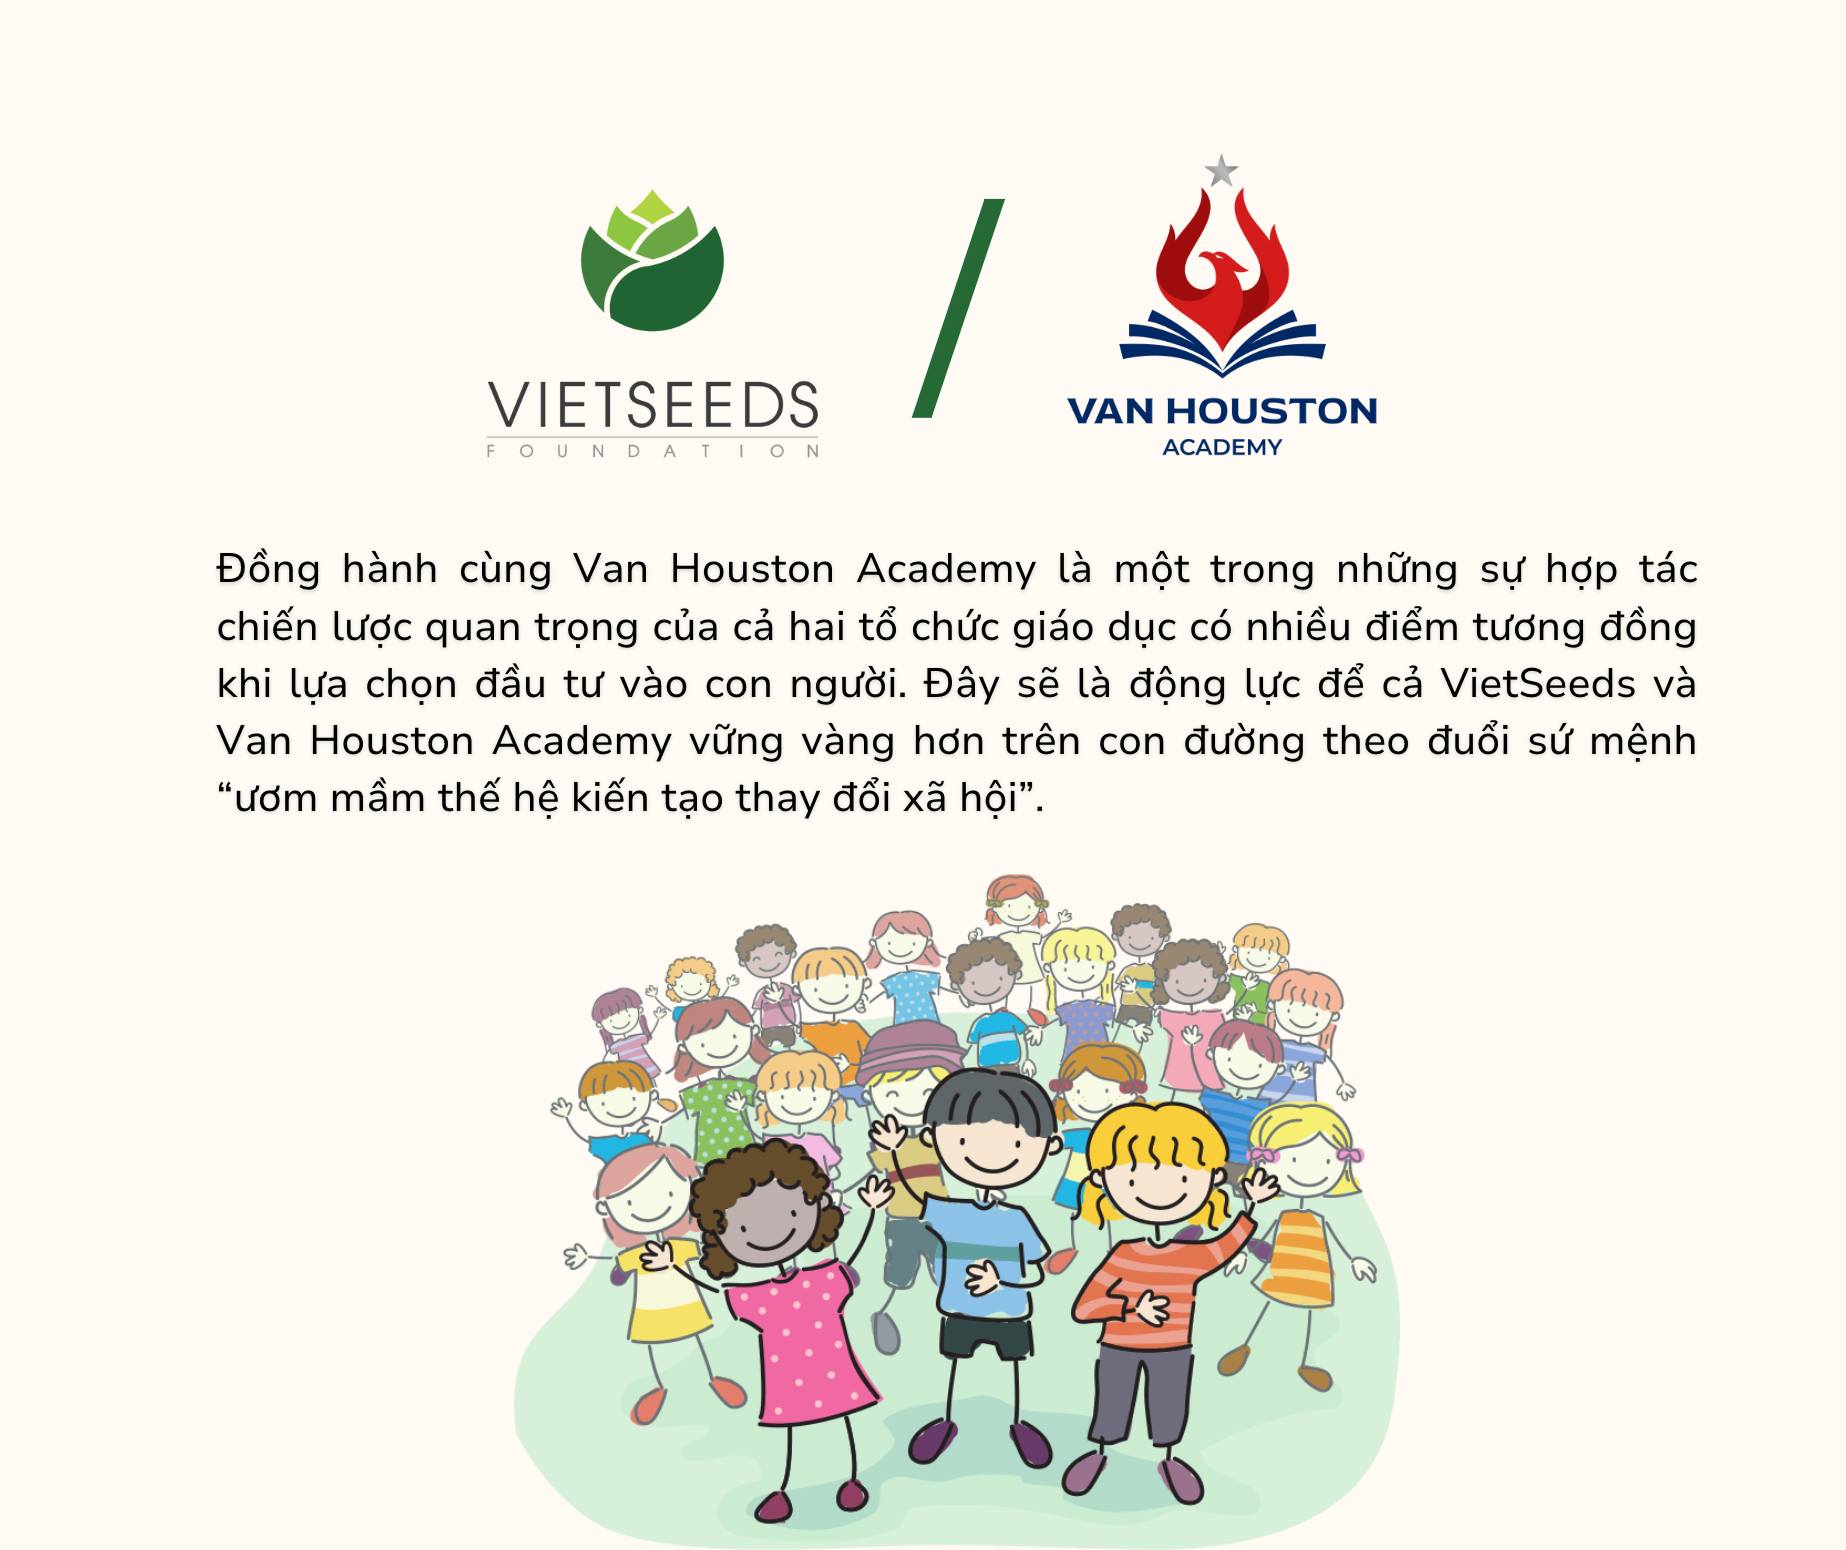 VIETSEEDS OFFICIALLY ACCOMPANIES WITH VAN HOUSTON ACADEMY